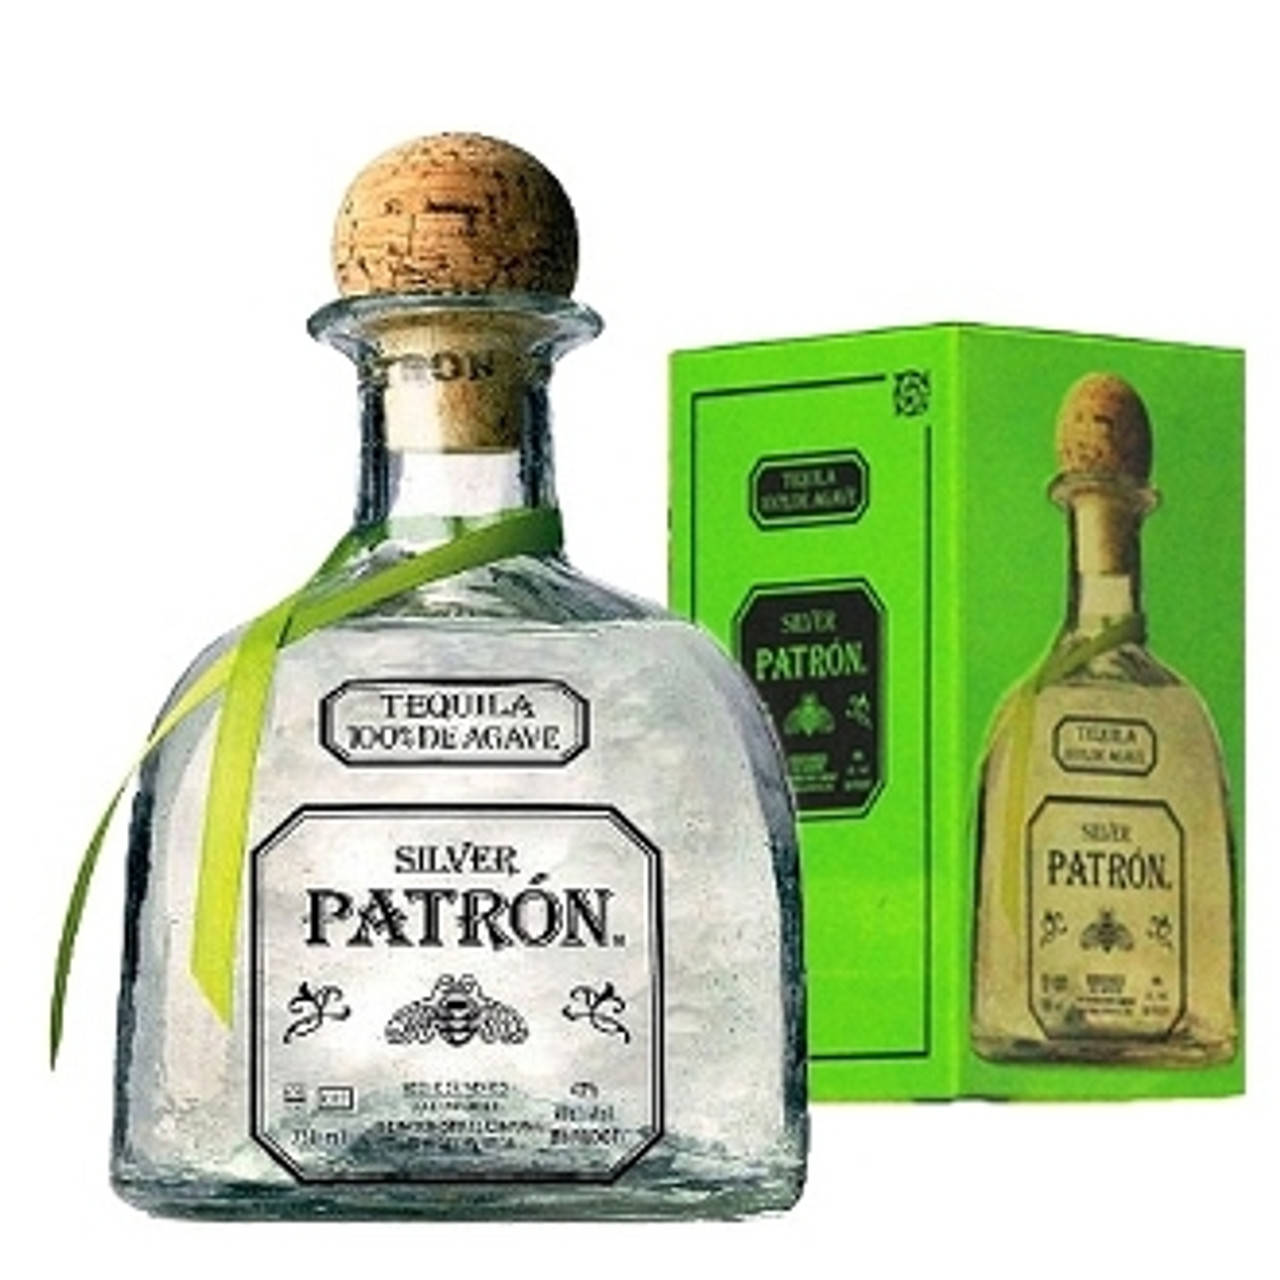 Download Patron Tequila Silver Bottle and Box Wallpaper | Wallpapers.com